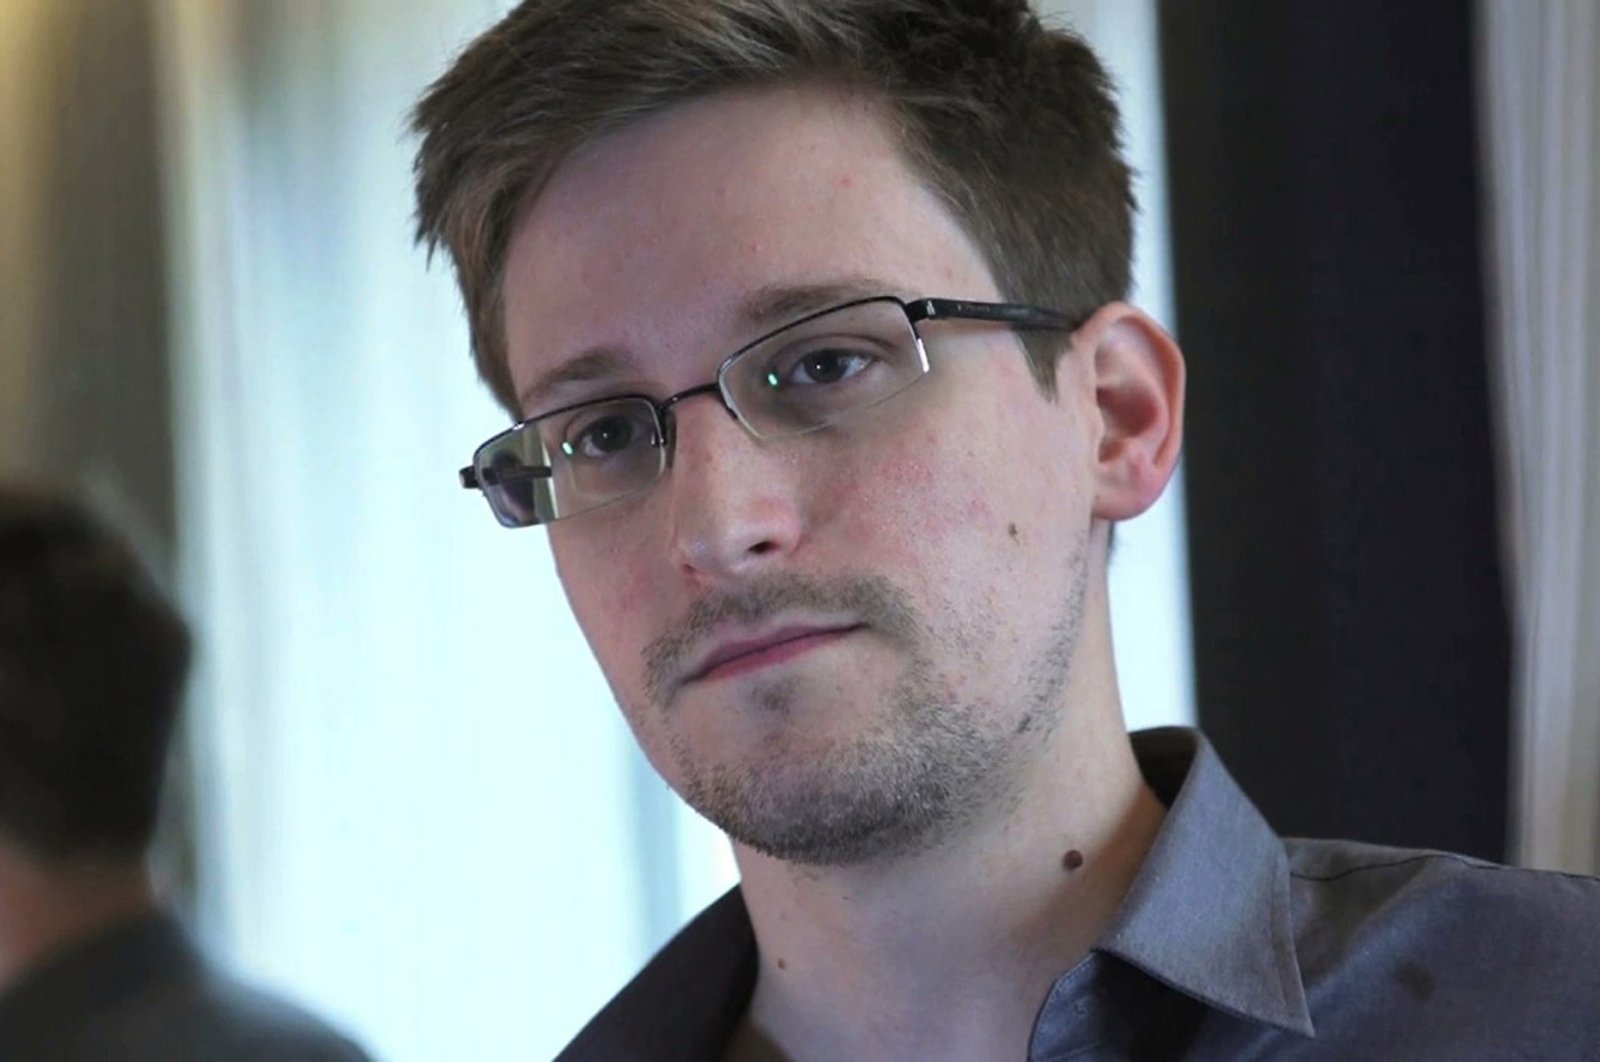 Former U.S. spy agency contractor Edward Snowden is seen in this still image taken from video during an interview by The Guardian in his hotel room in Hong Kong on June 6, 2013. (Reuters Photo)